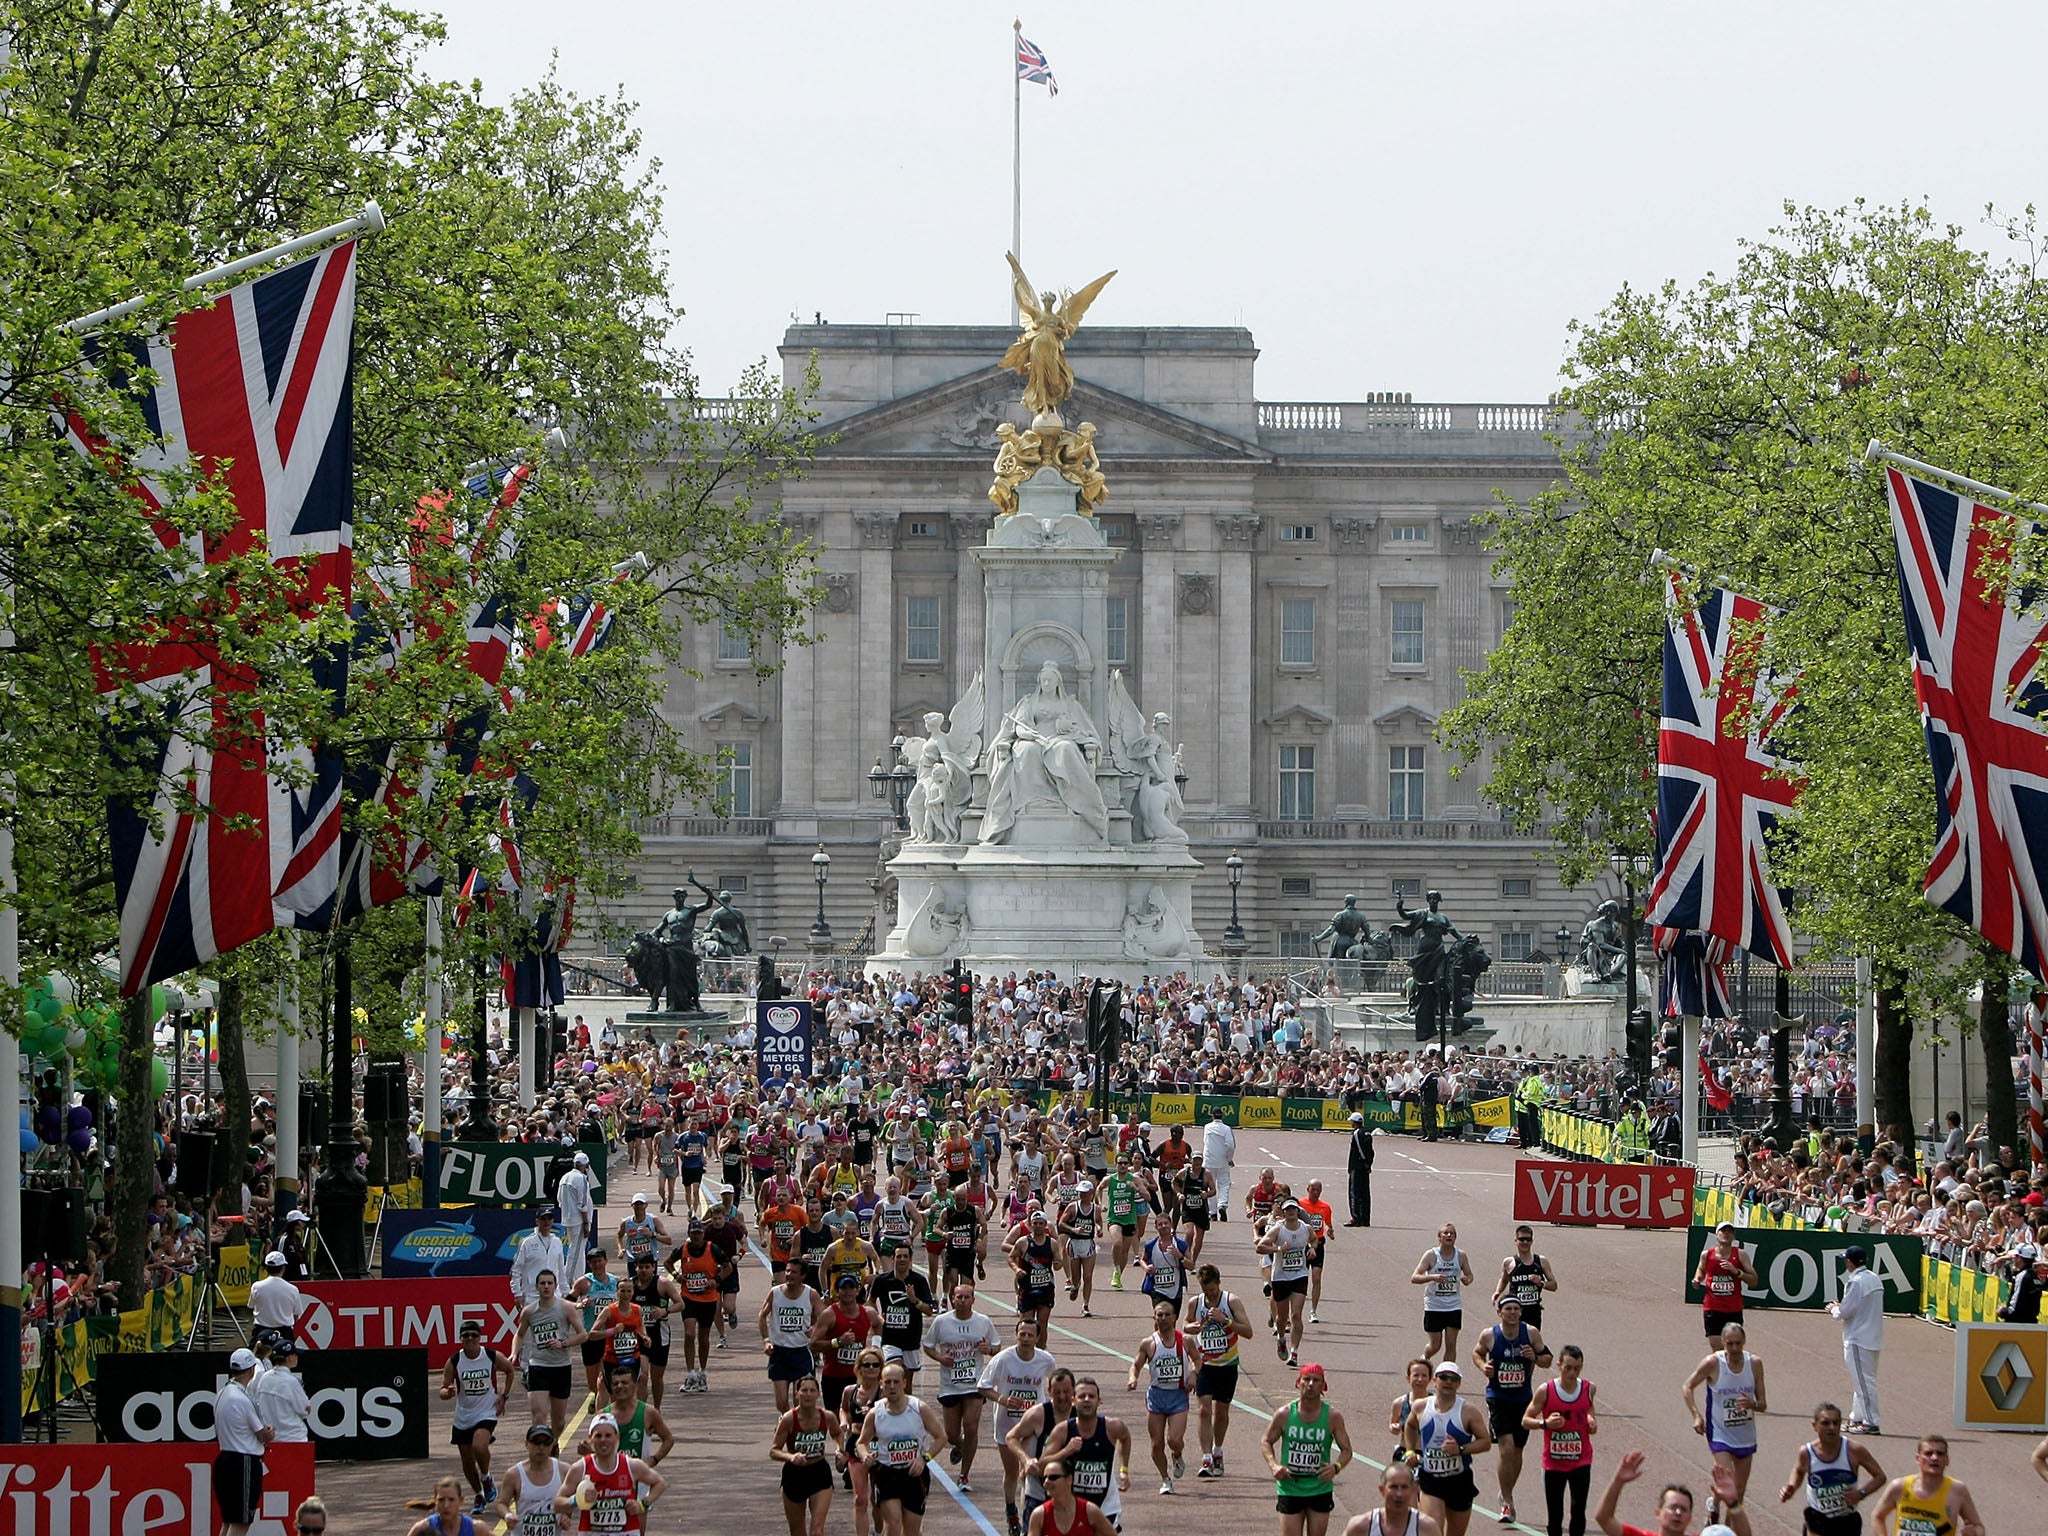 The borough is the location for several major tourist attractions including Buckingham Palace